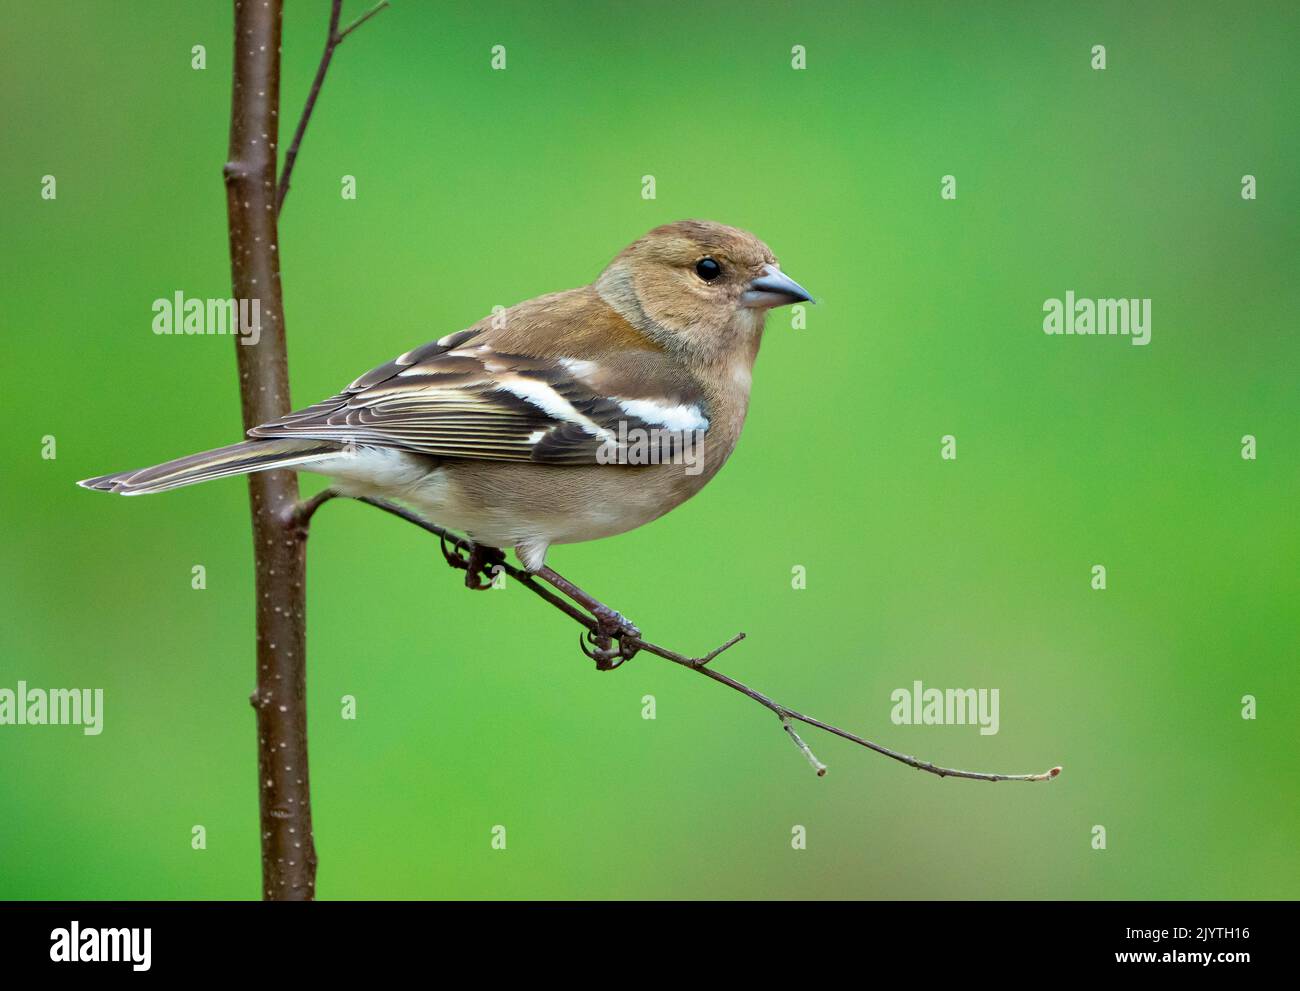 Chaffinch (Fringilla coelebs) perched on a branch, England Stock Photo